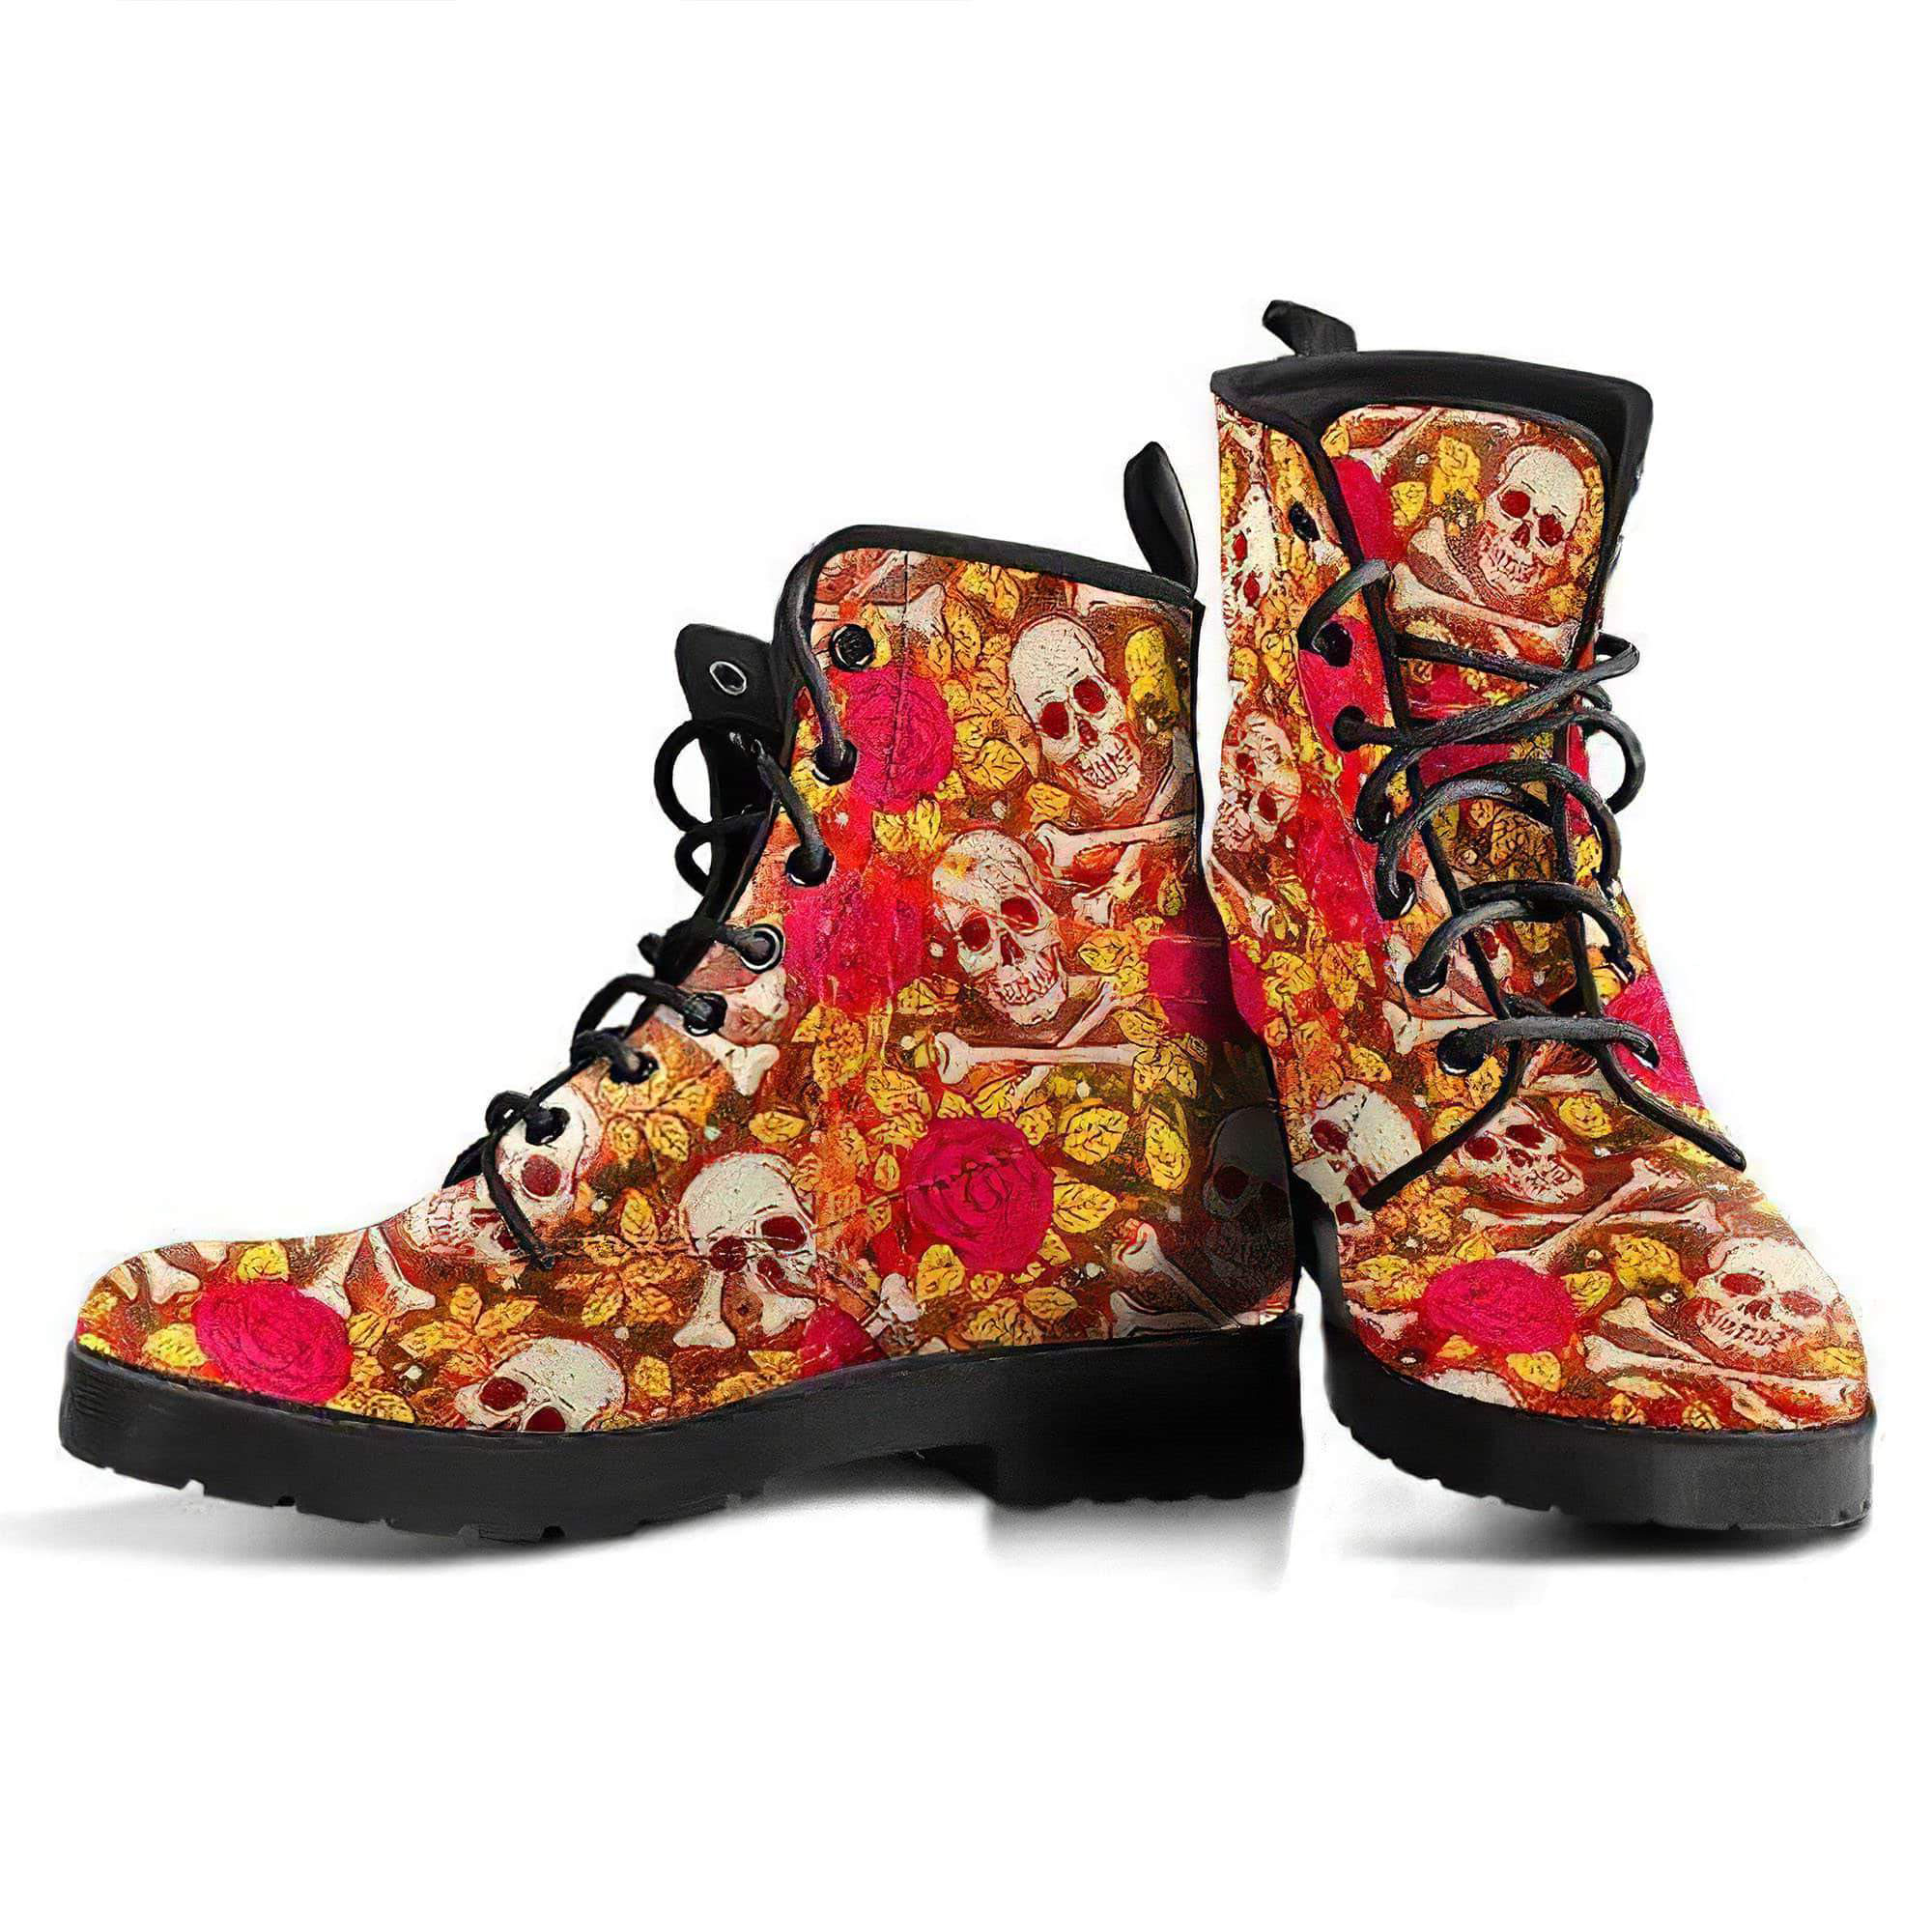 skull-and-bones-floral-women-s-leather-boots-women-s-leather-boots-12051948240957.jpg